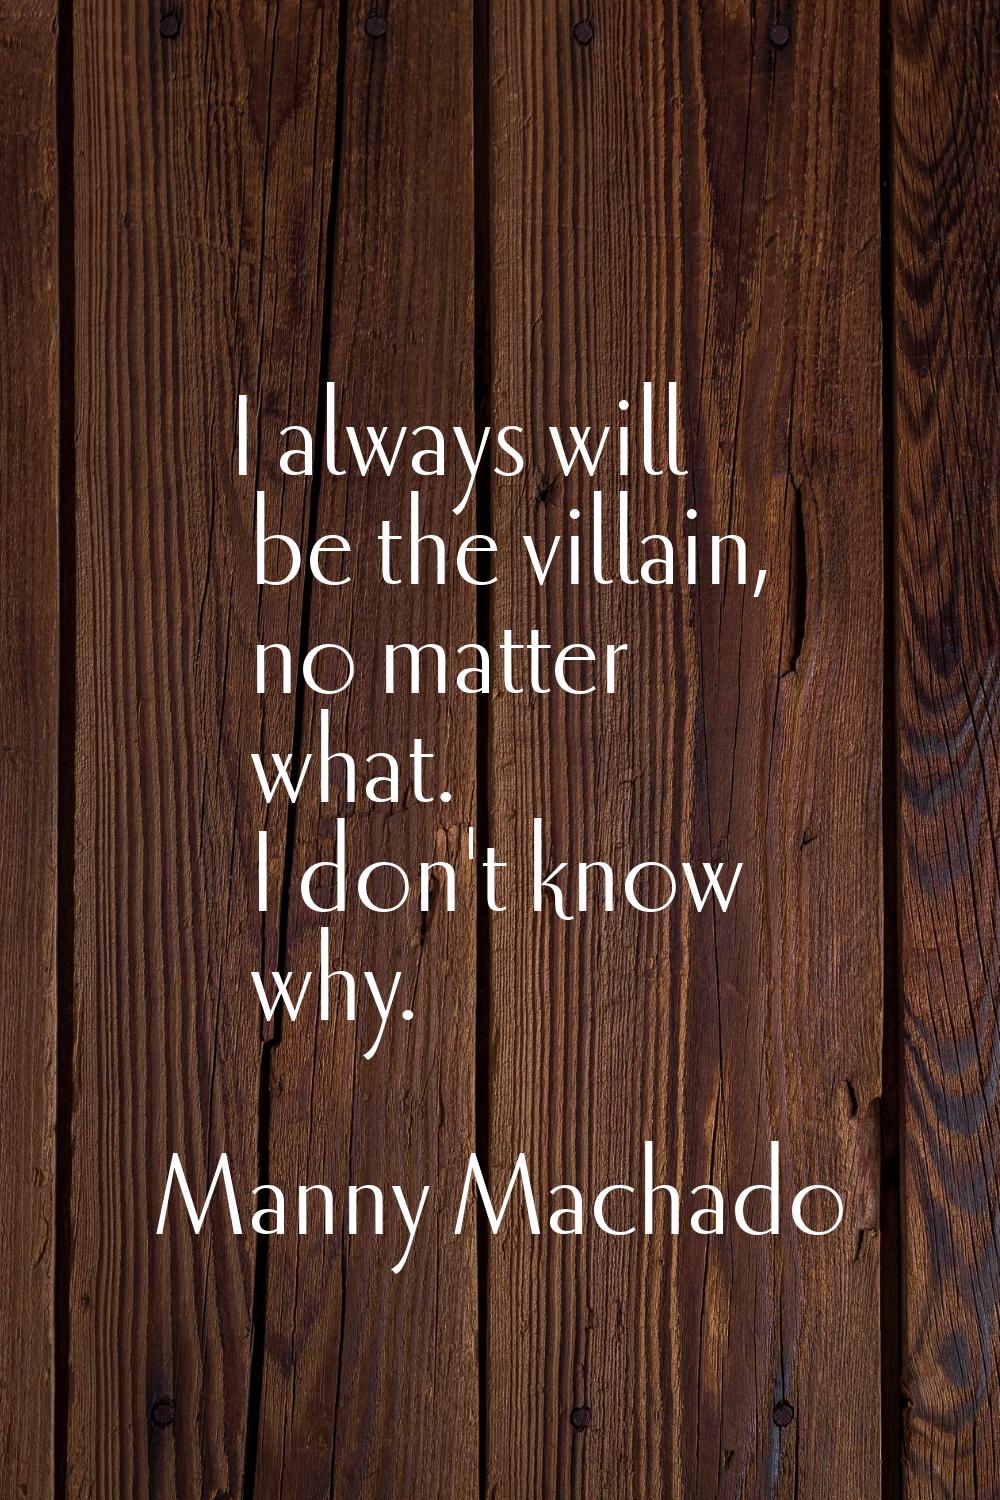 I always will be the villain, no matter what. I don't know why.